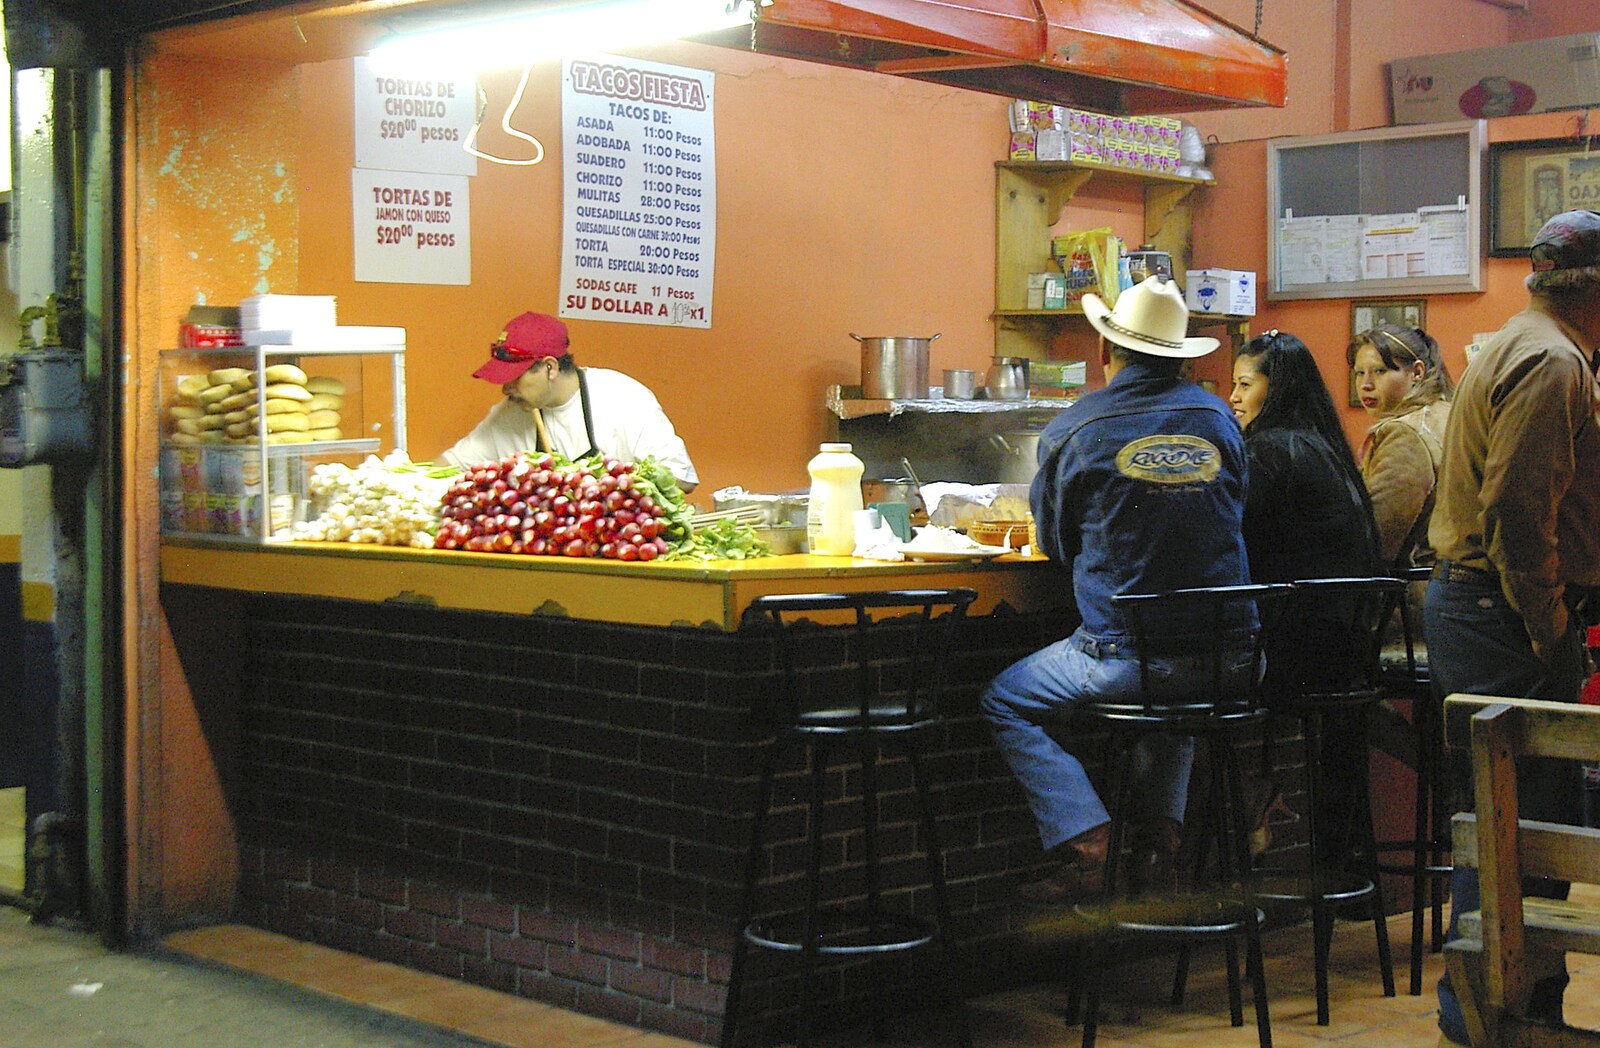 The taco dude gets on with his tacos from A Trip to Tijuana, Mexico - 25th March 2006